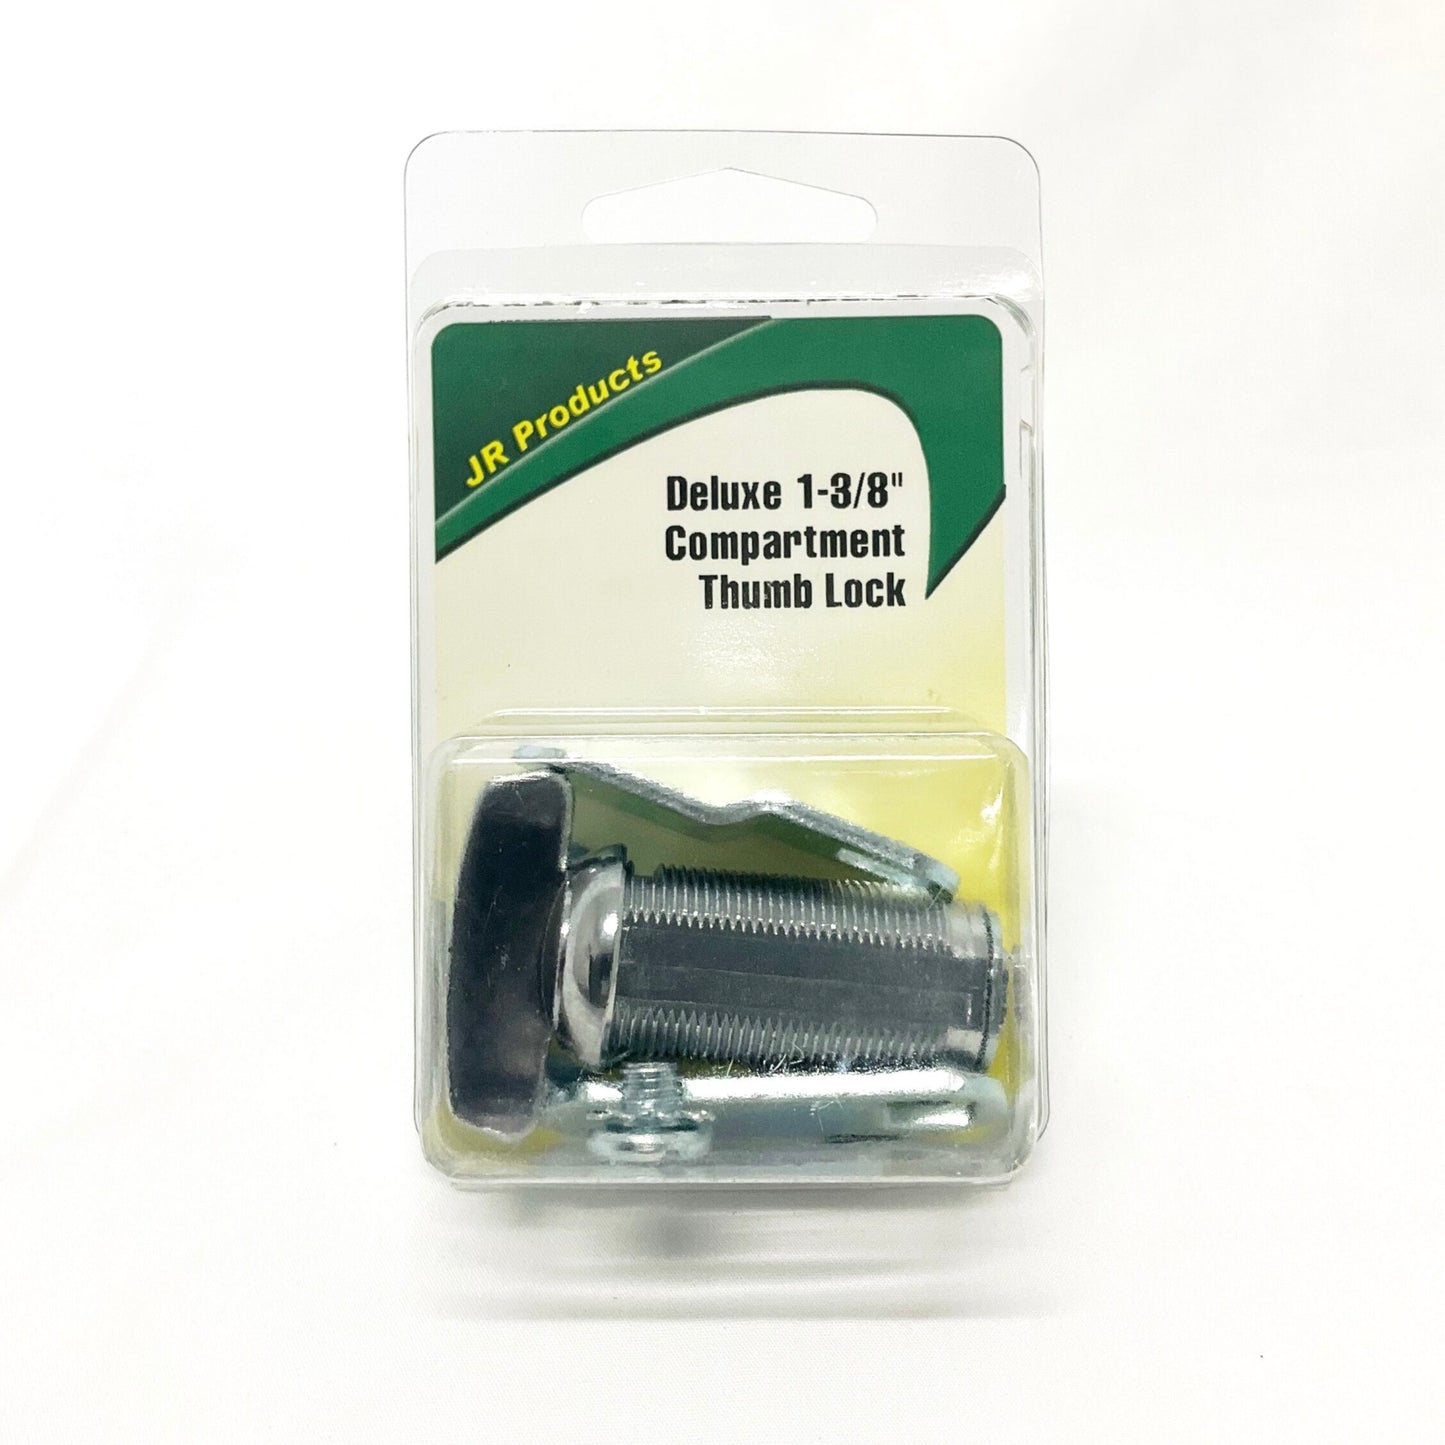 Deluxe 1-3/8” Compartment Thumb Lock